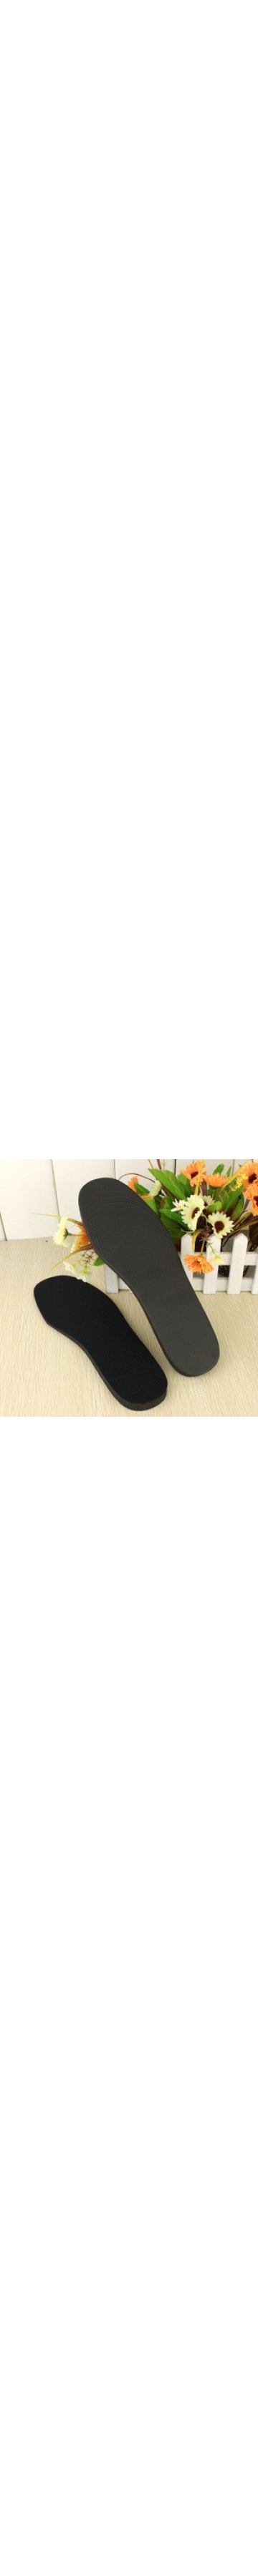 Insoles02